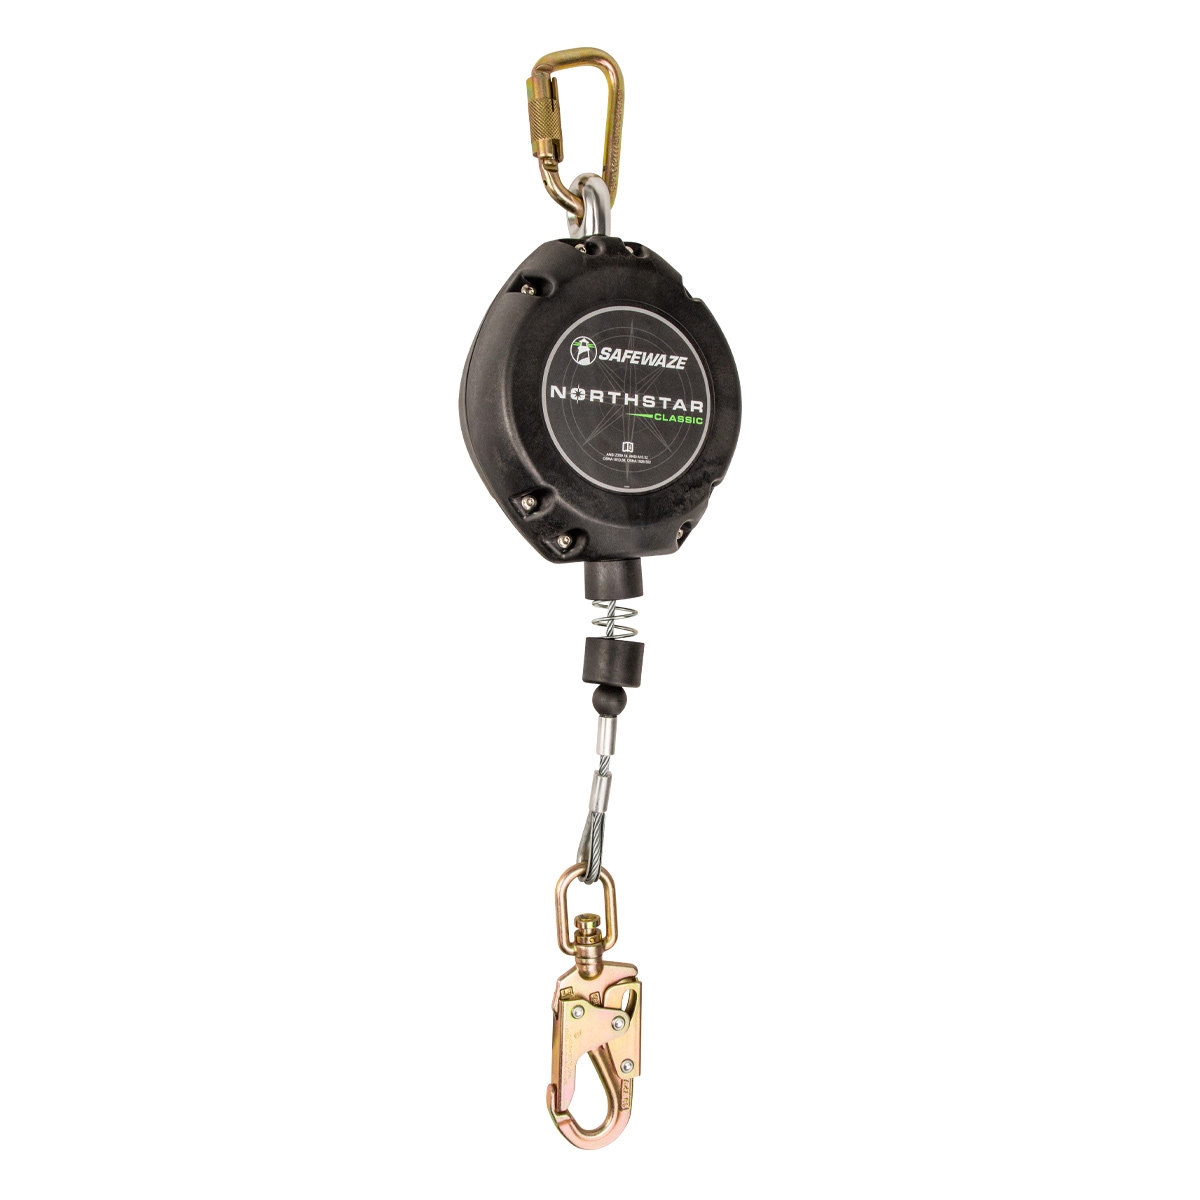 30ft Class B Retractable Cable w/Swivel Fall Indicator Hook - Utility and Pocket Knives